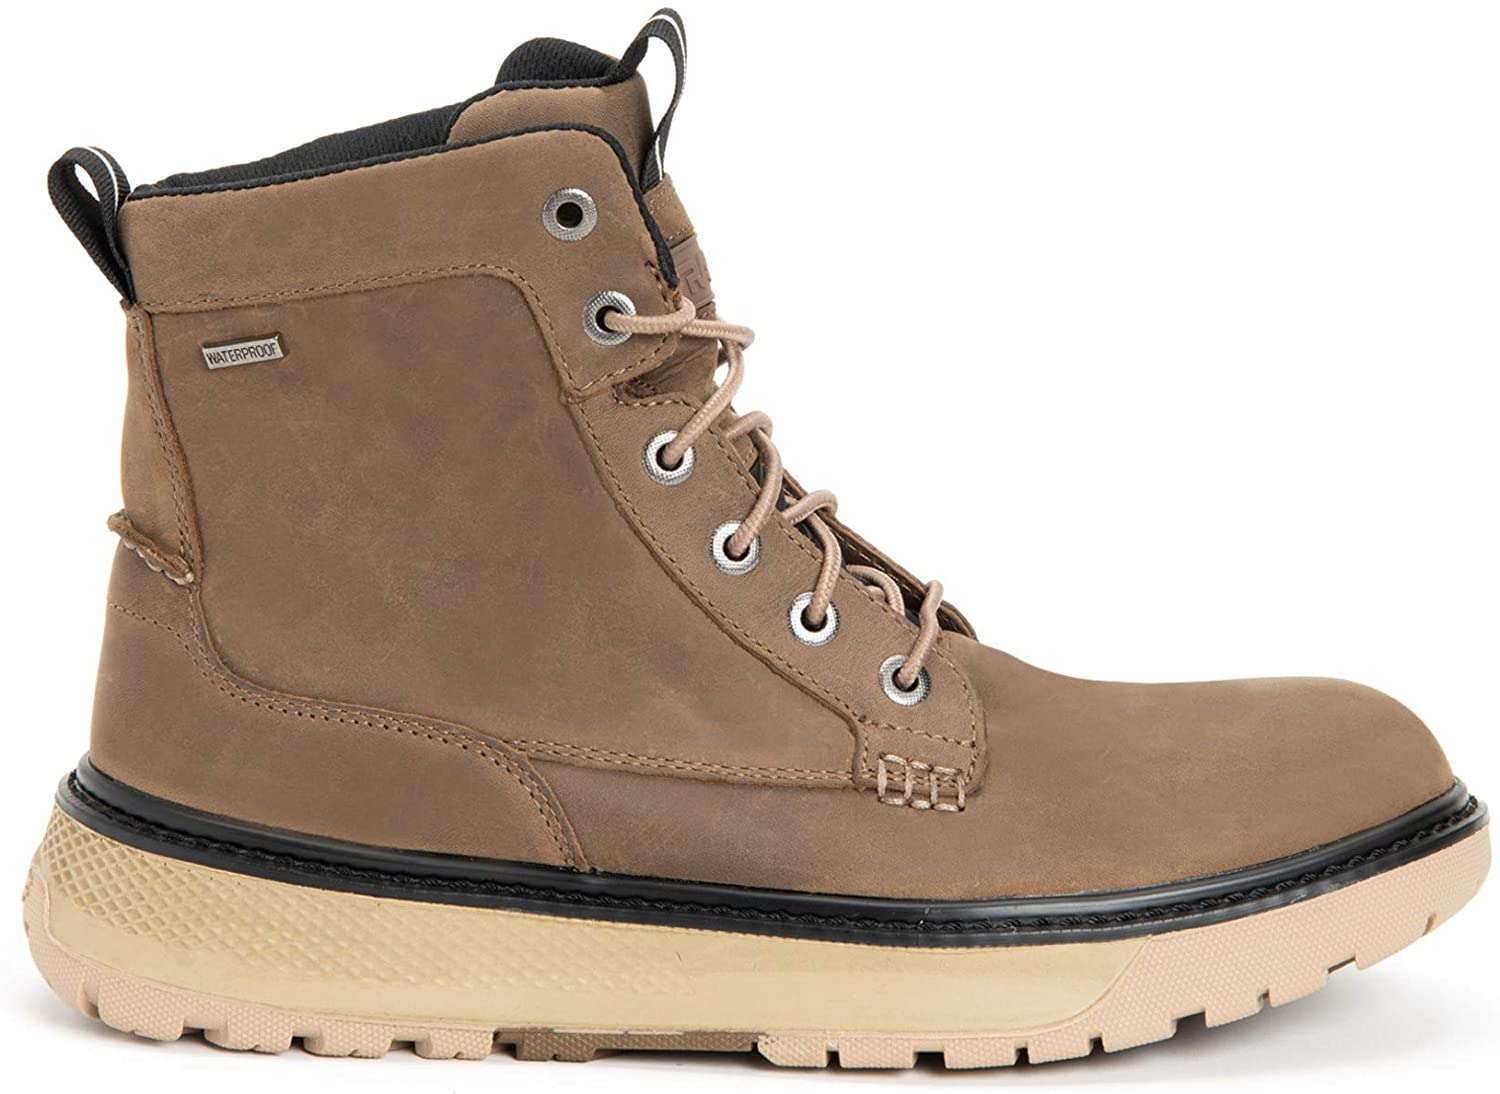 Men's Xtratuf Bristol Bay Work Boot in Taupe from the side